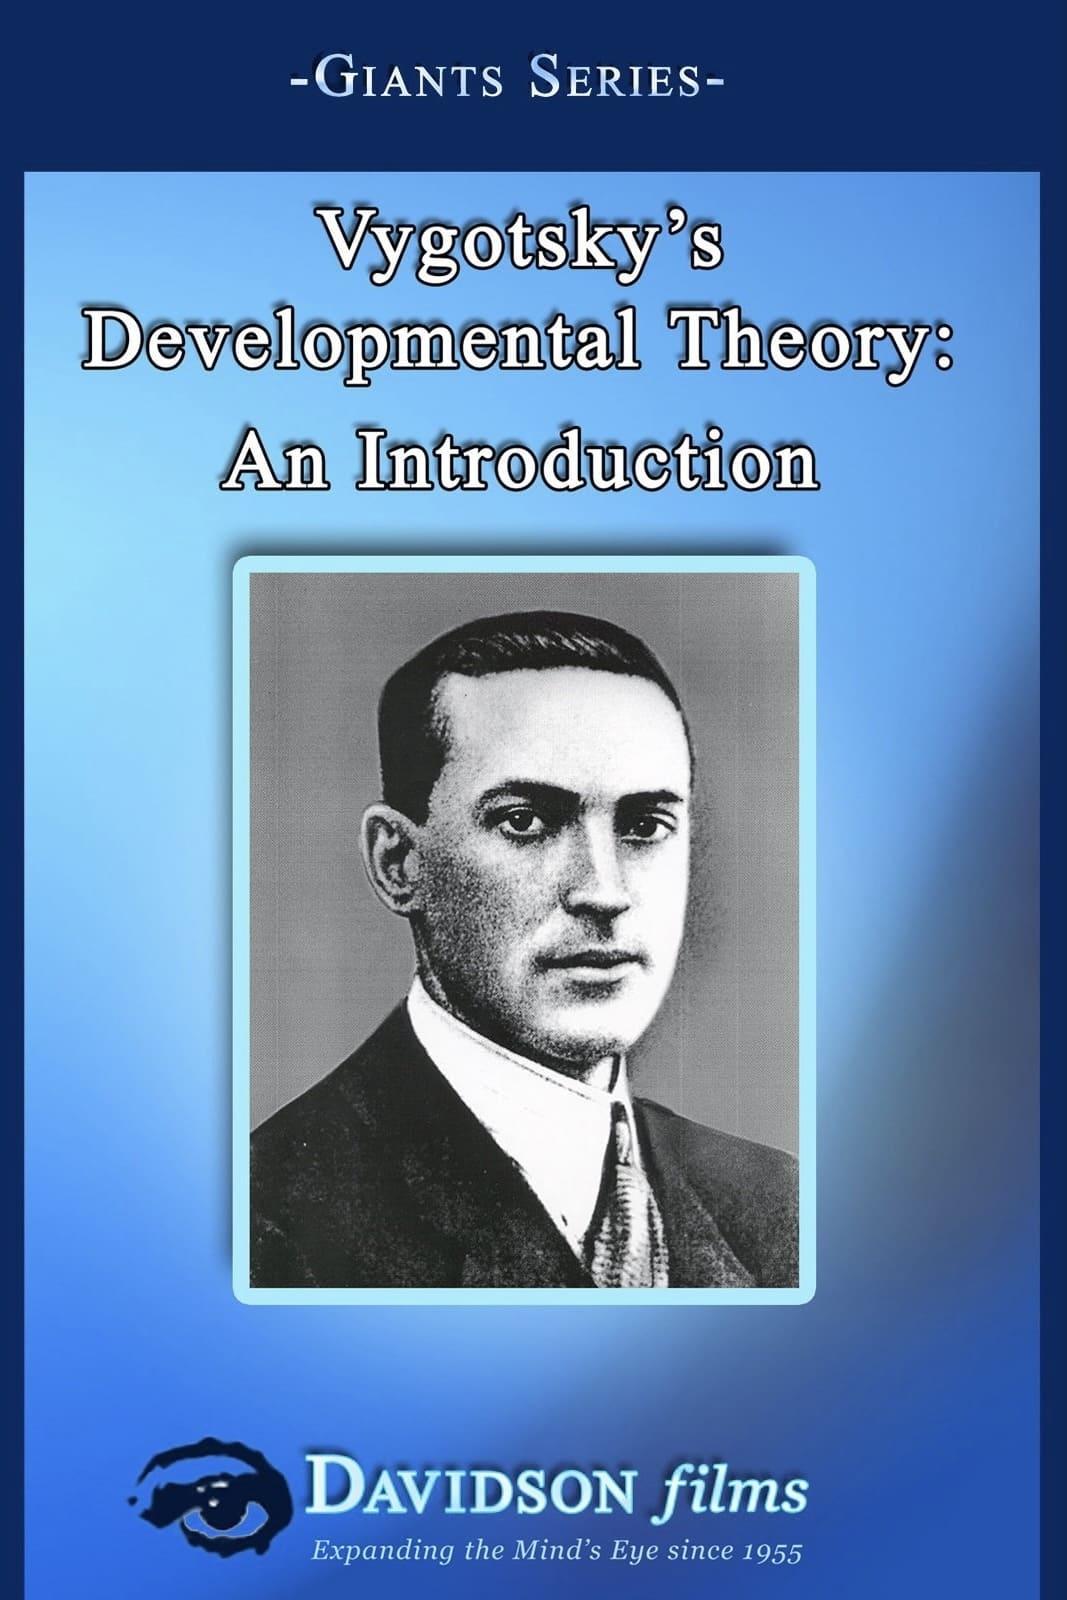 Vygotsky's Developmental Theory: An Introduction poster